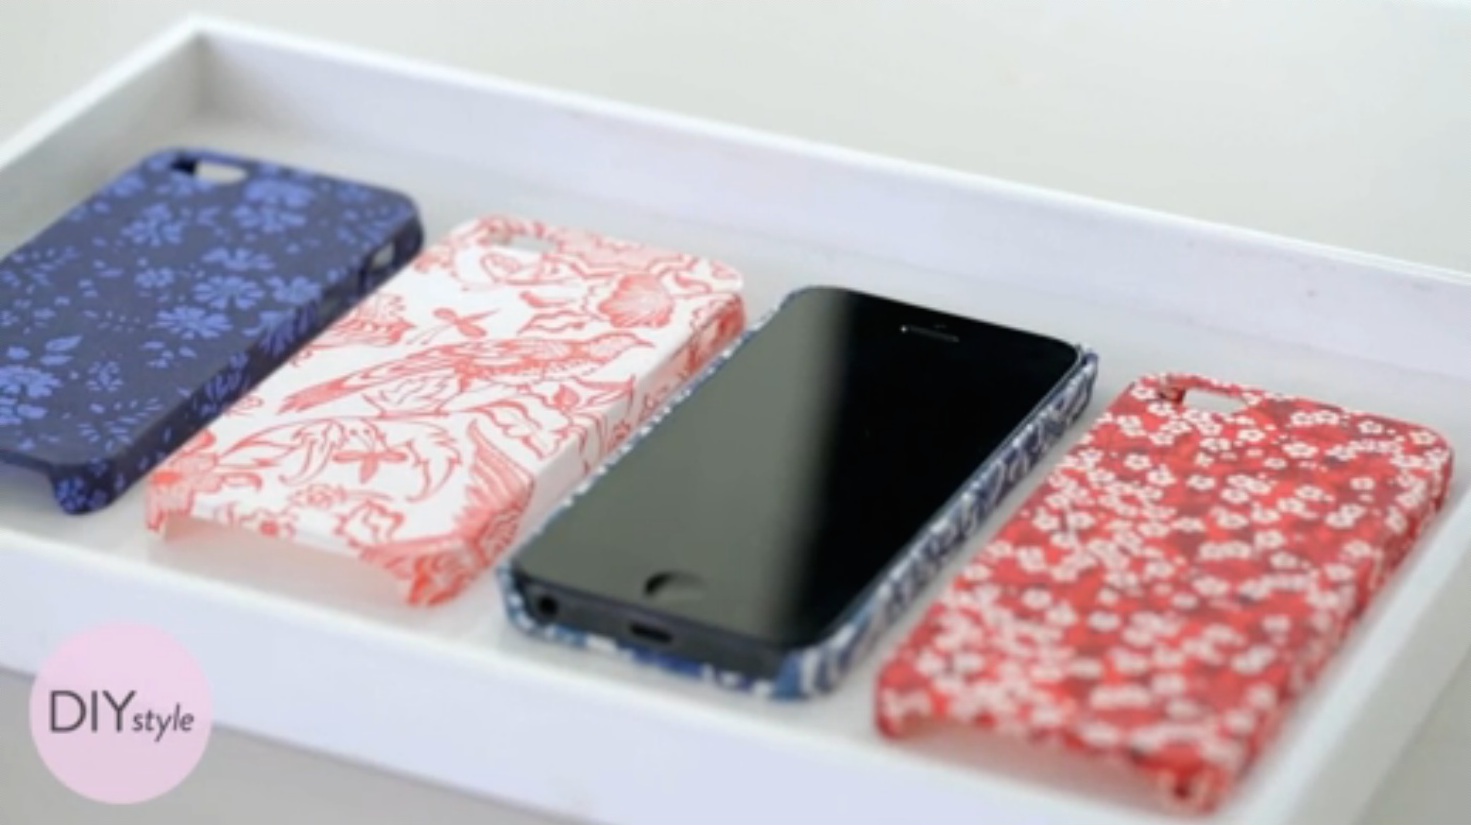 DIY fabric iPhone covers: If you ever wanted to make them, you’re in luck